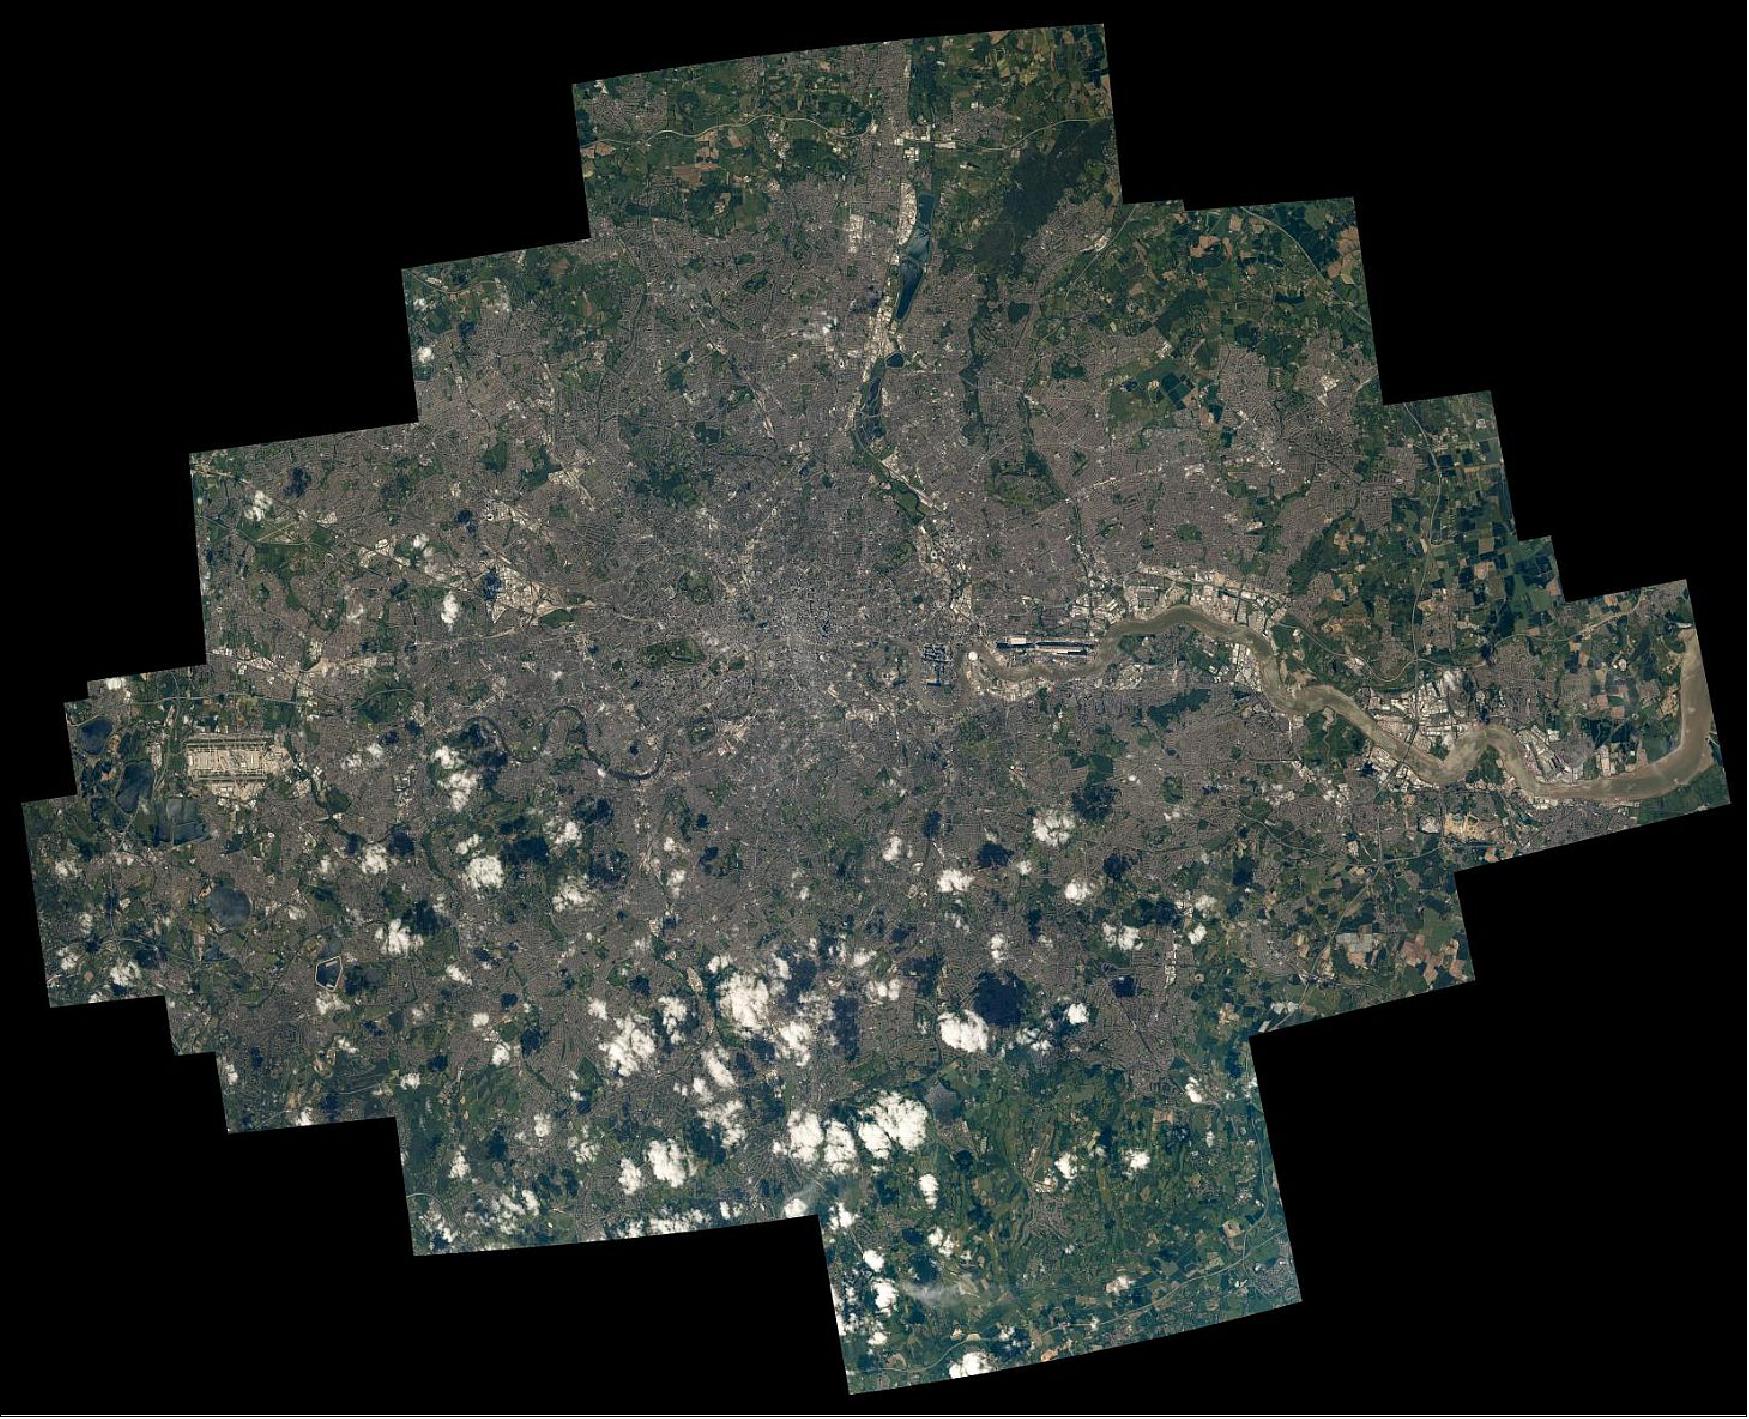 Figure 59: Greater London as observed from the ISS by Thomas Pesquet. Thomas asked ESA to have the series of highly zoomed-in pictures aligned into this collage to show the area in detail. The International Space Station flies at roughly 400 km altitude so Thomas uses the longest lenses available onboard (image credit: ESA/NASA–T. Pesquet/W. Harold)